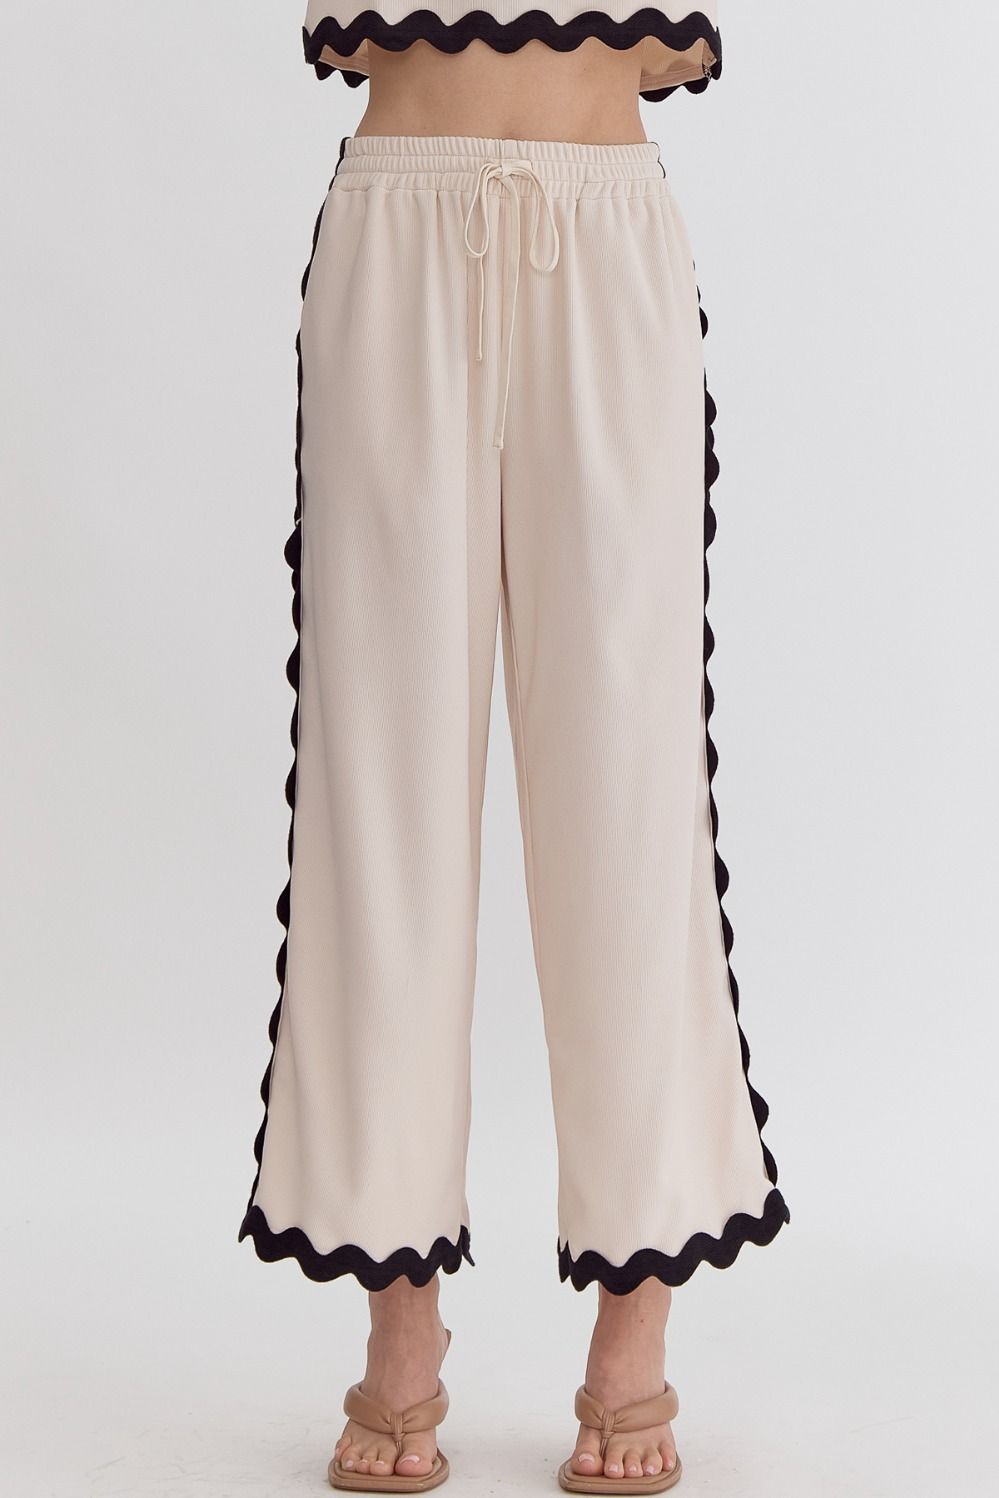 Entro Ecru ribbed knit wide leg pants with black scalloped piping ric rac trim